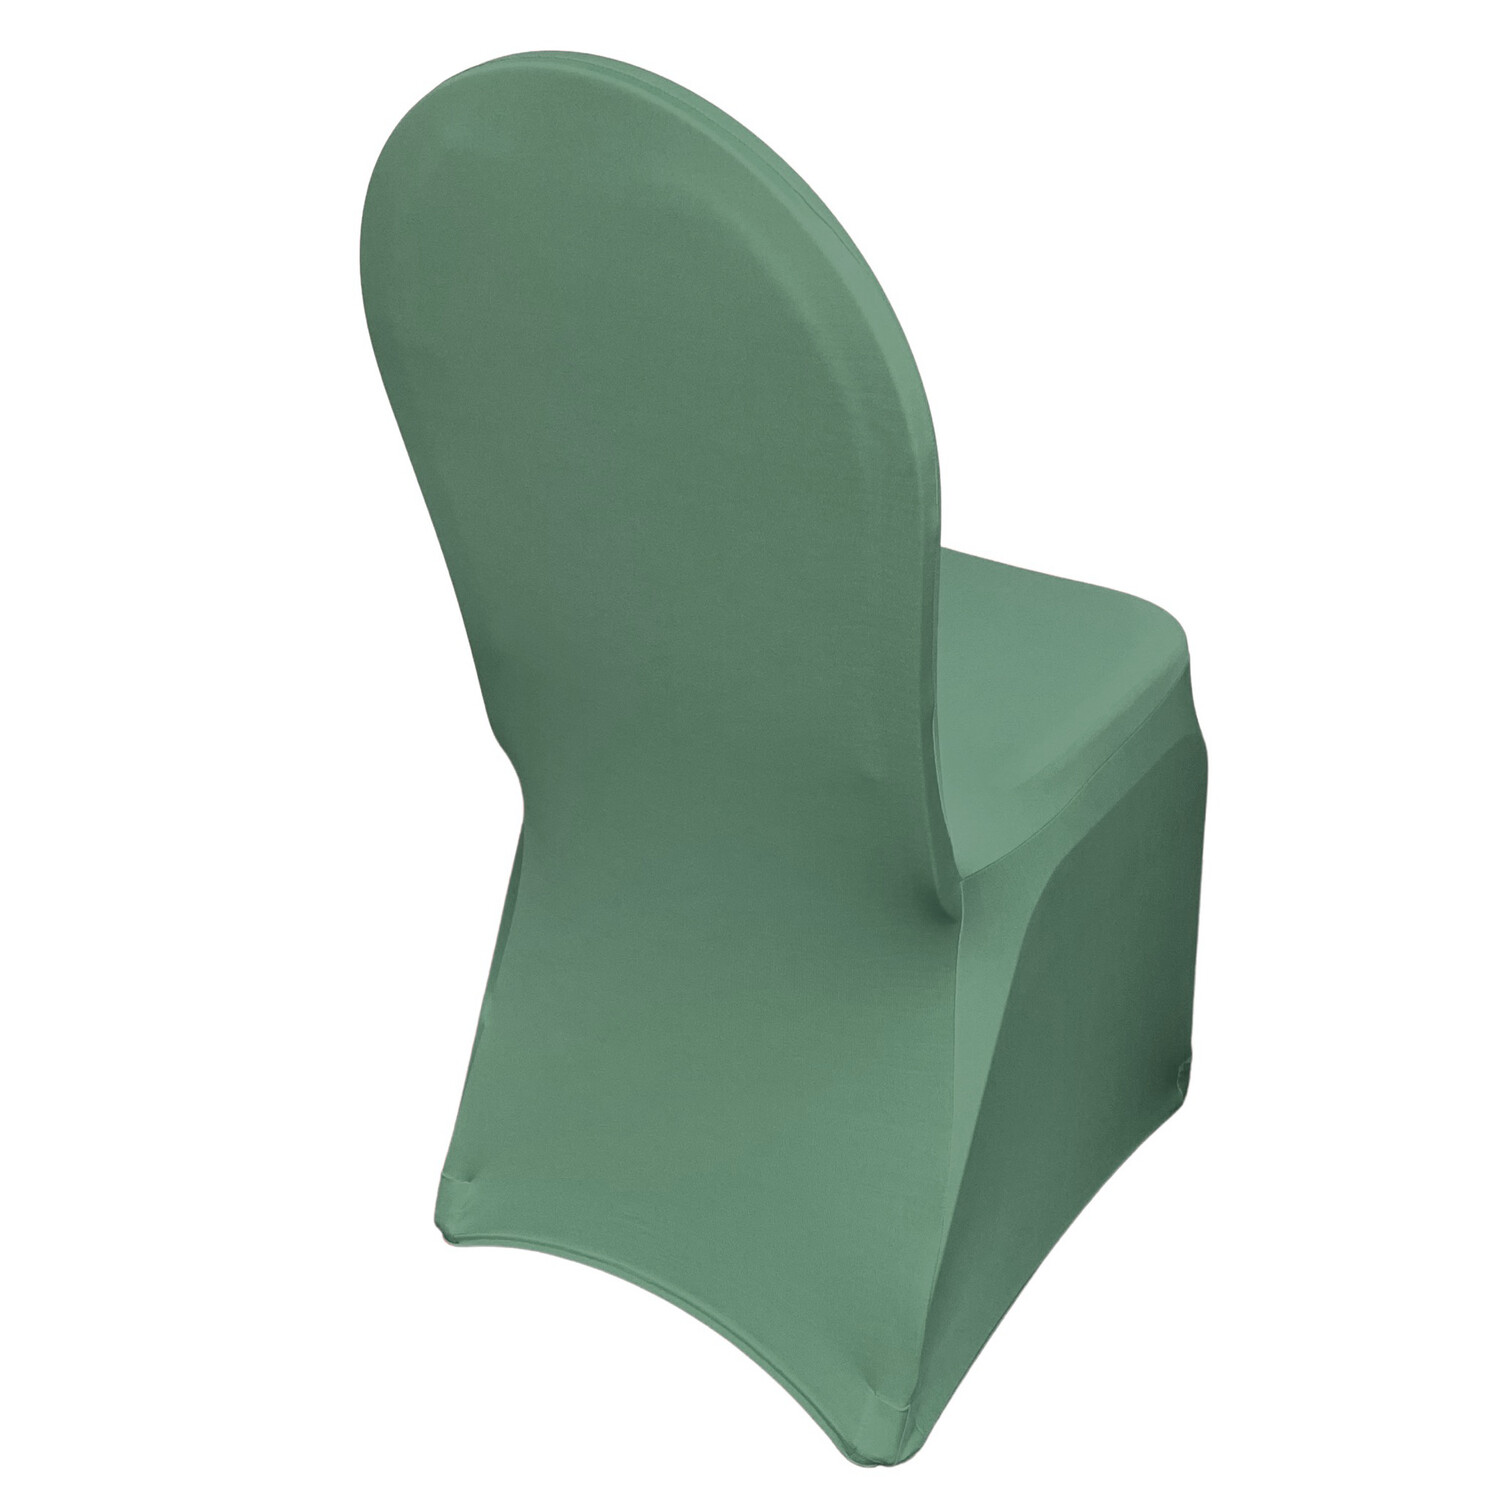 Clover Green Spandex Chair Covers